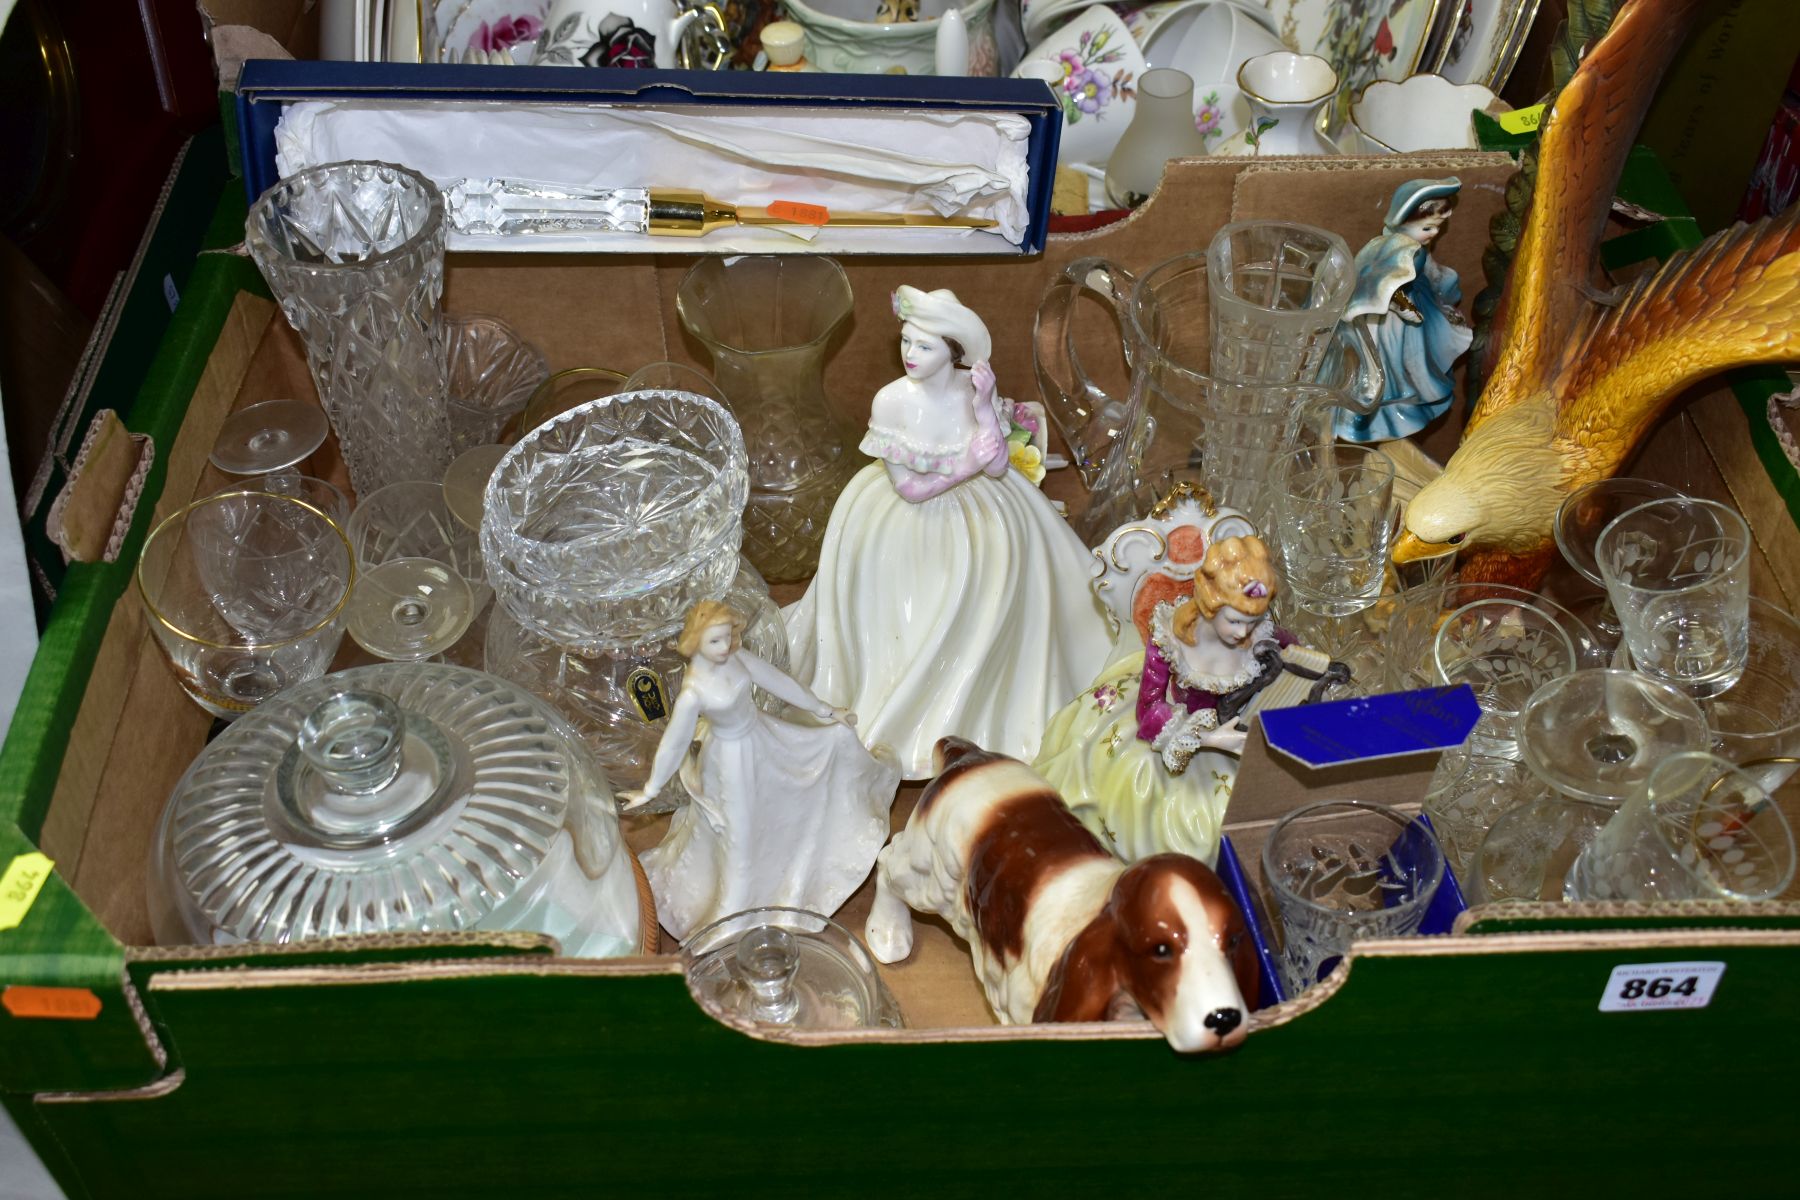 THREE BOXES AND LOOSE CERAMICS, GLASS, KITCHENWARES, JCB PRESENTATION ITEMS etc to include a - Image 2 of 5